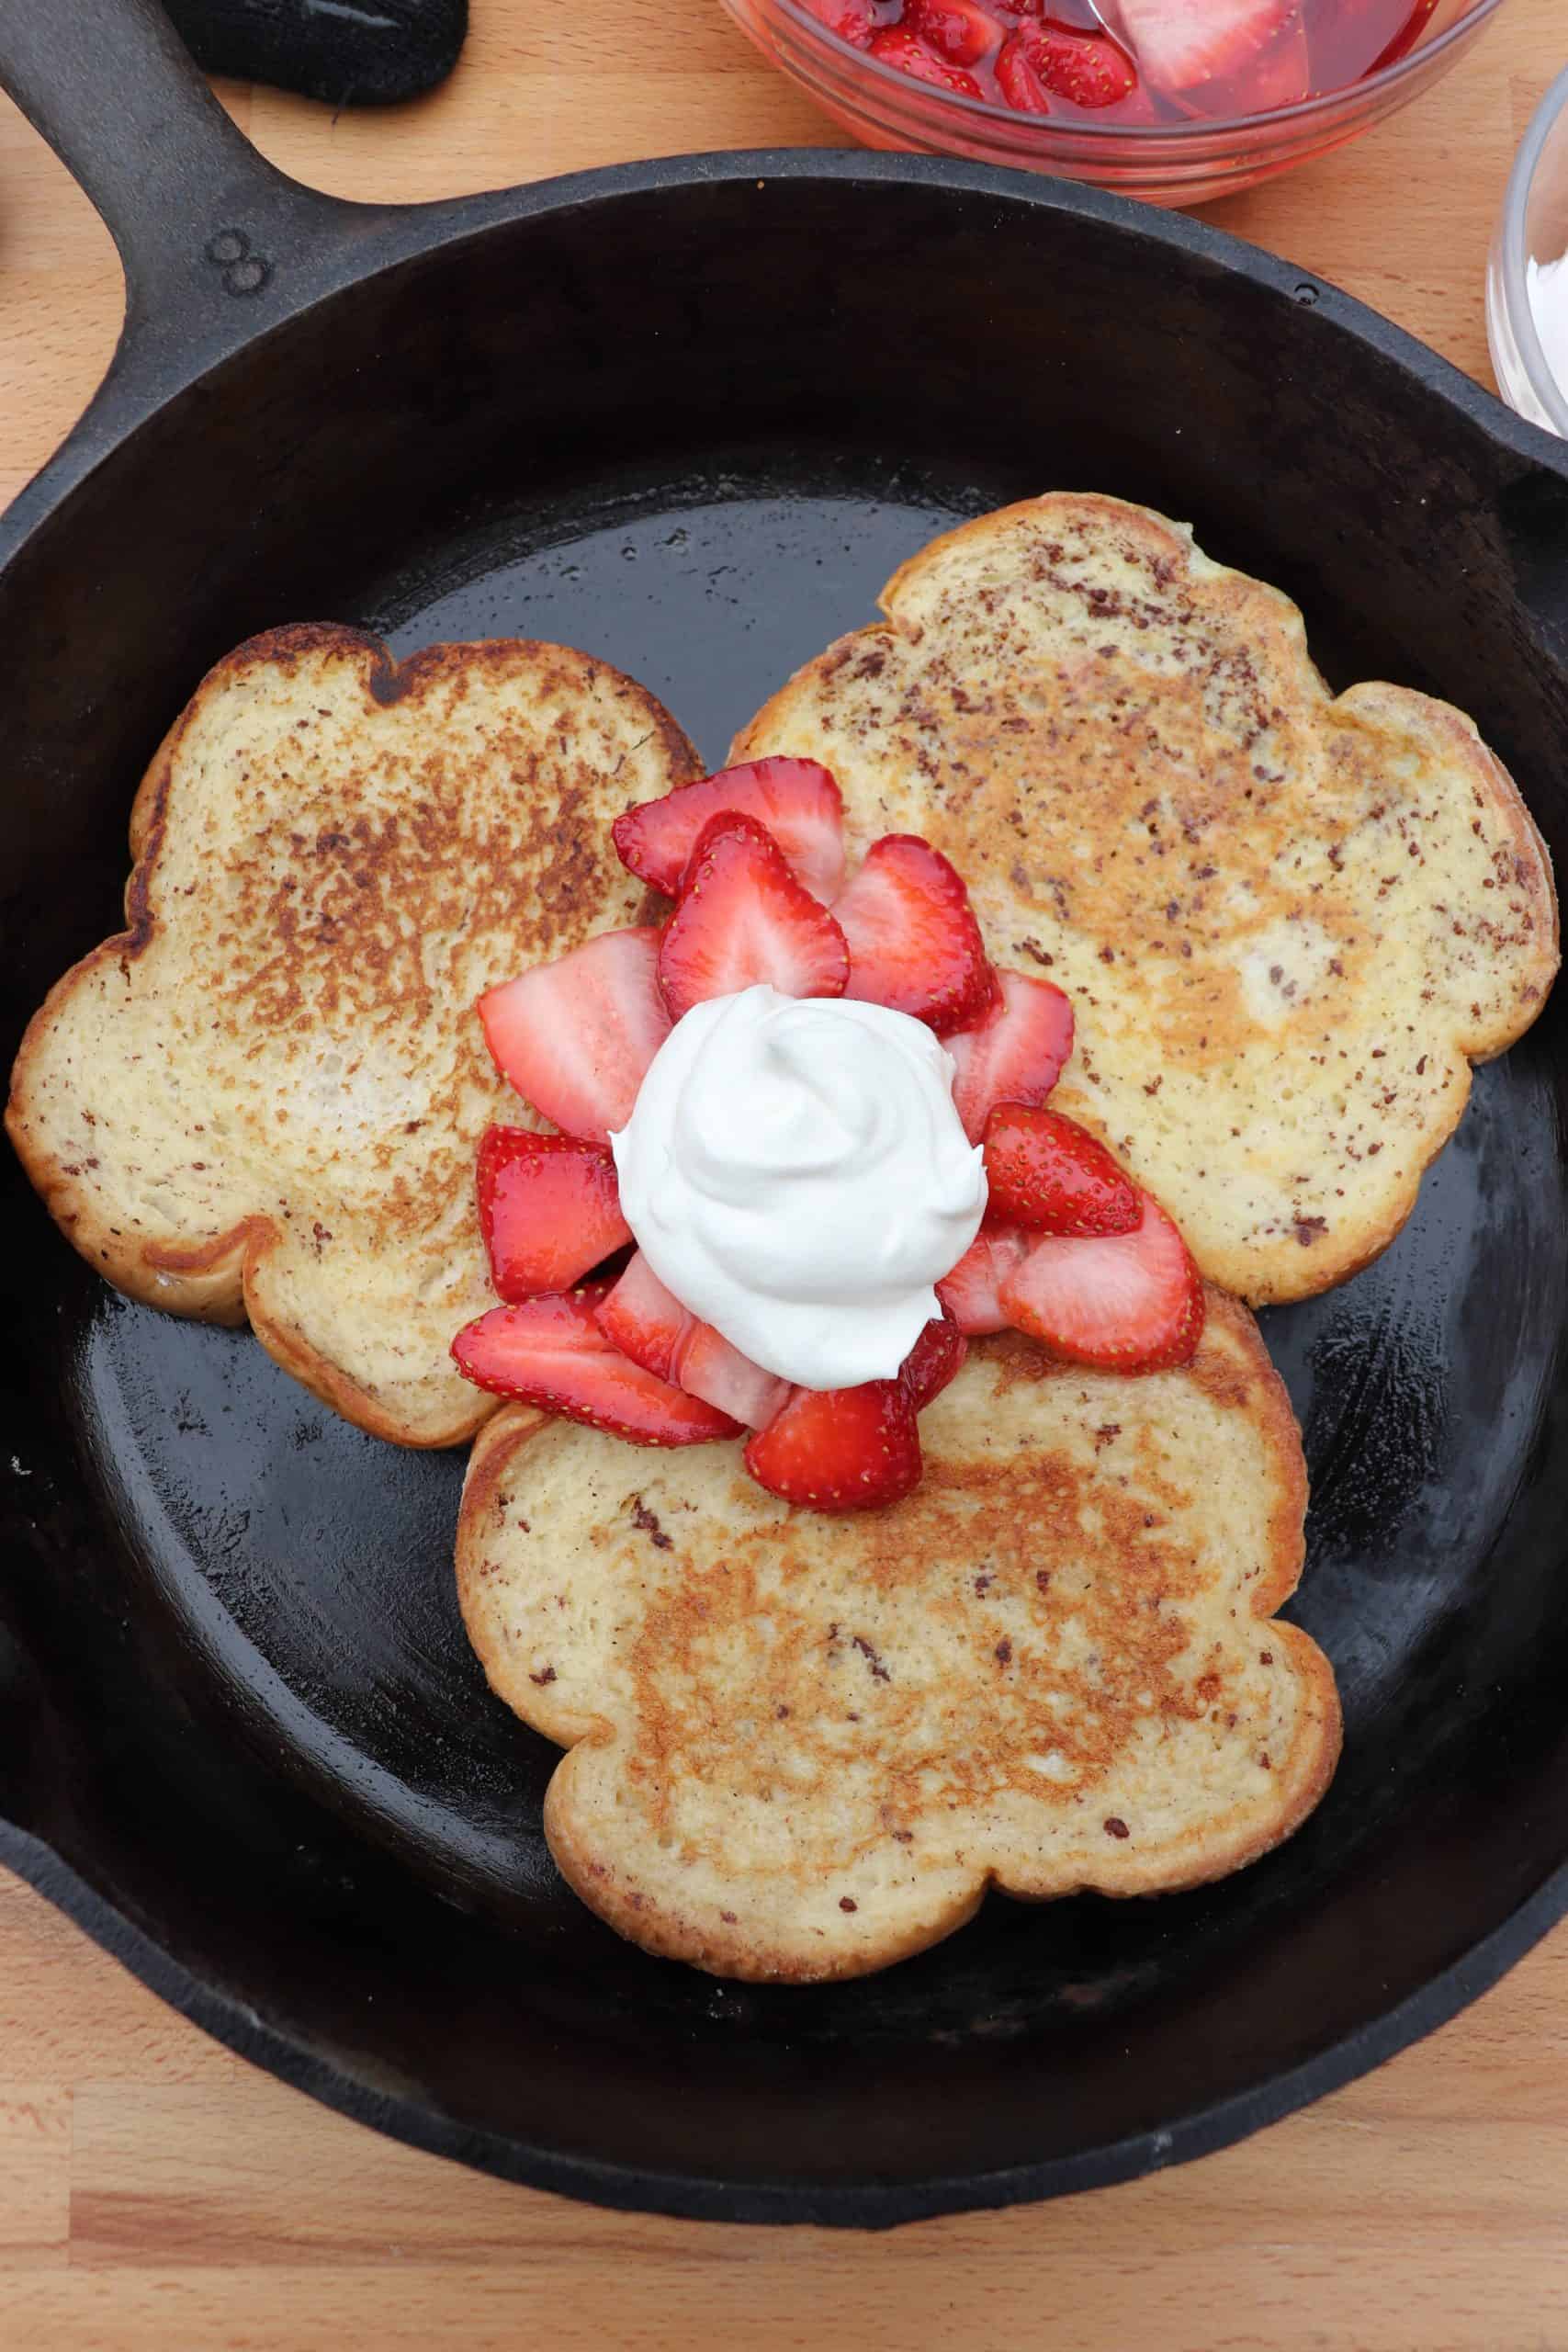 skillet french toast recipe